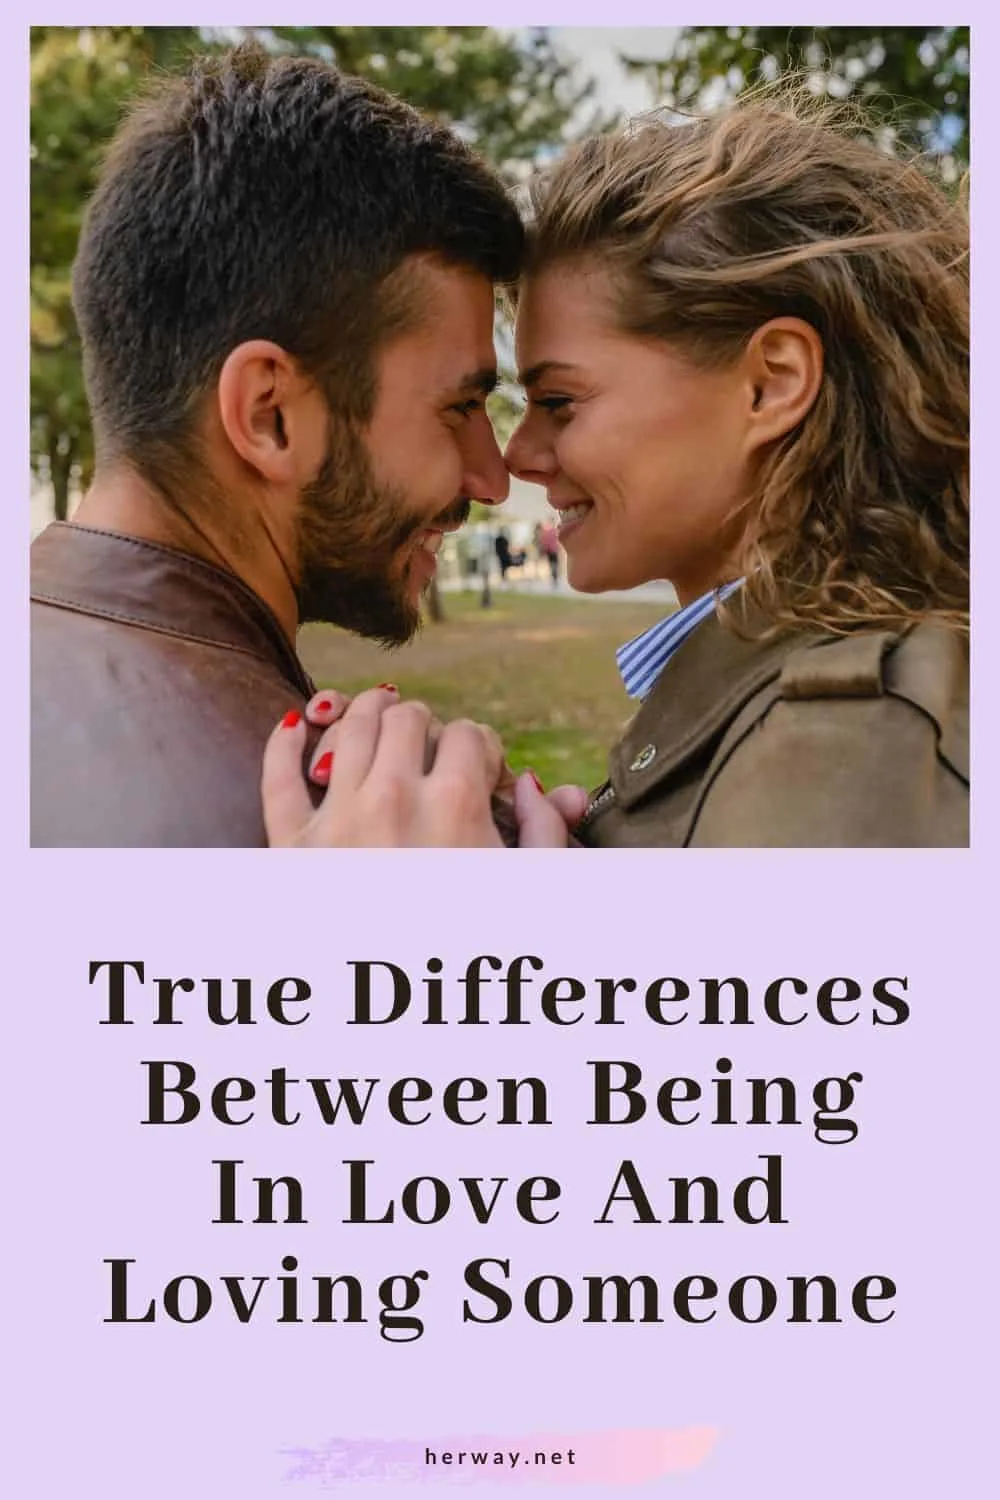 True Differences Between Being In Love And Loving Someone